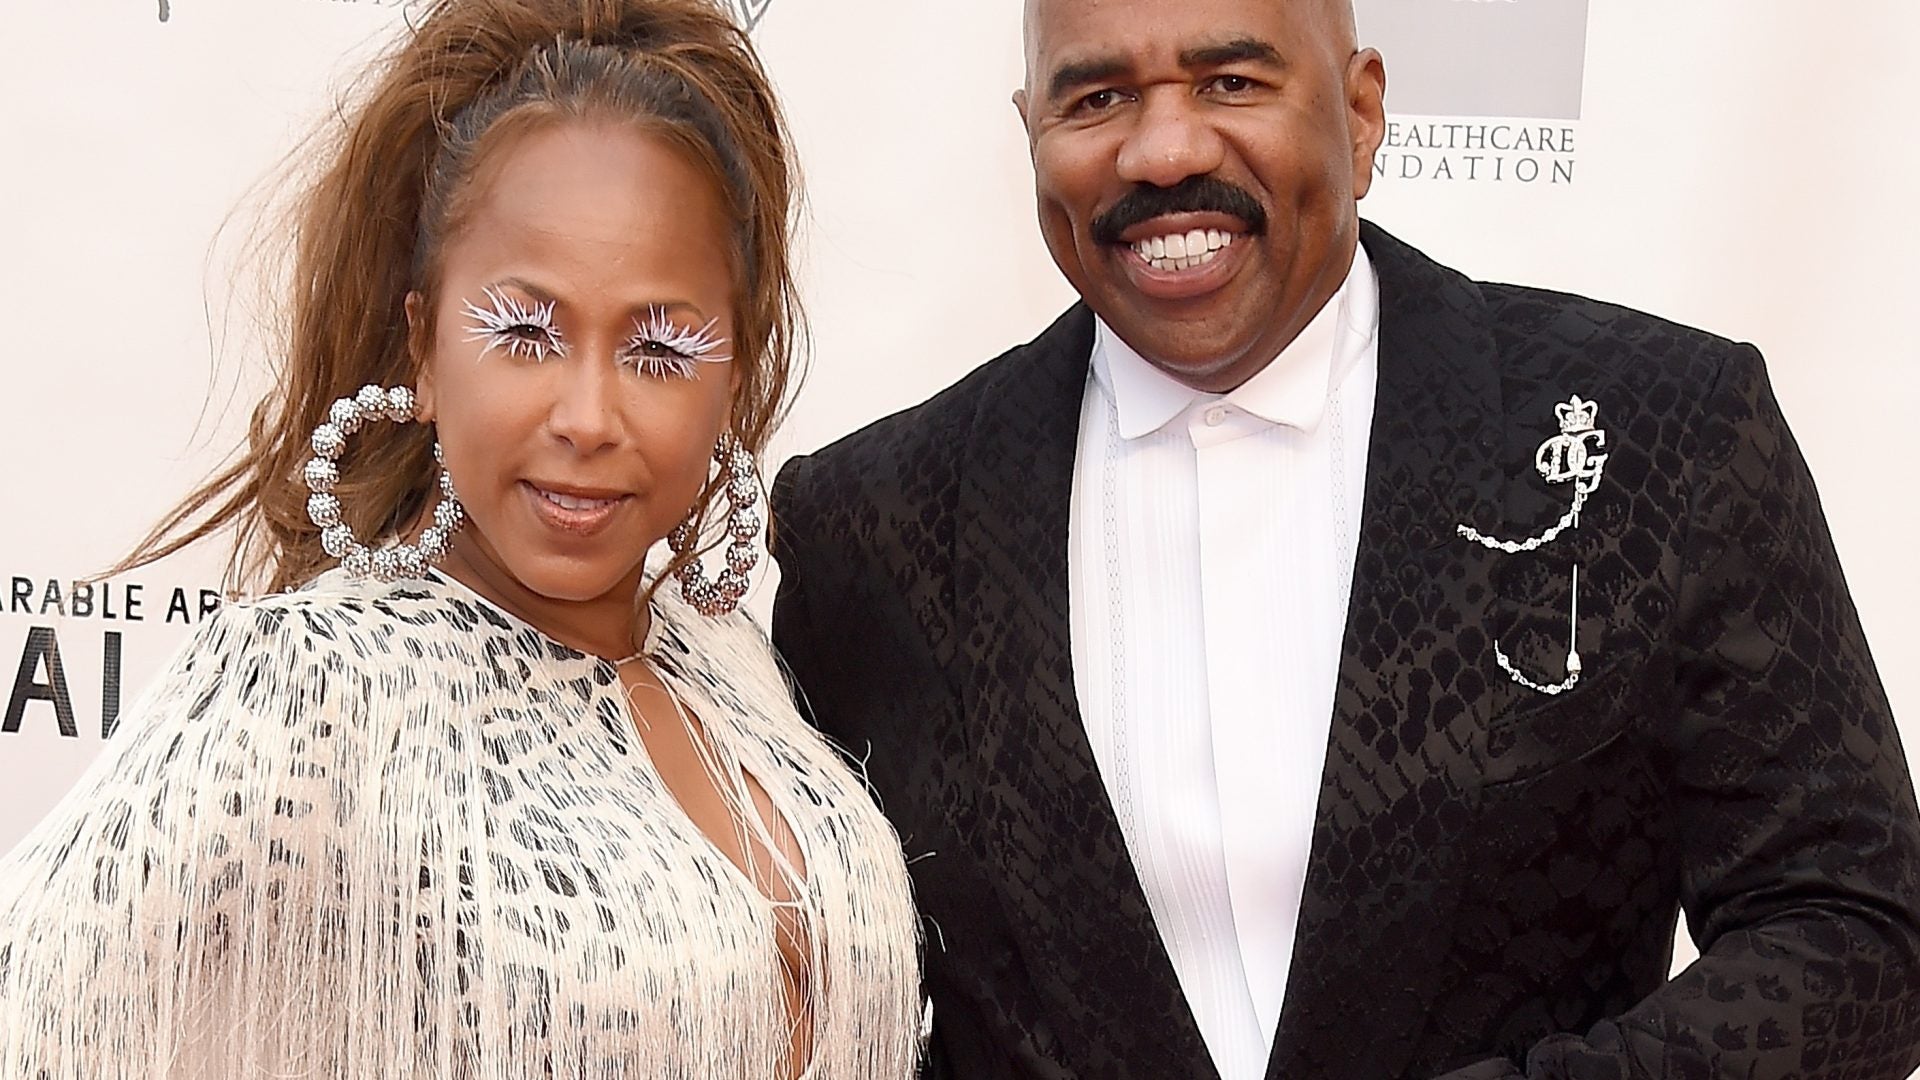 Steve And Marjorie Harvey Confront Cheating Rumors Claiming Their ‘Marriage Is Fine’ Despite The 'Foolishness and Lies'